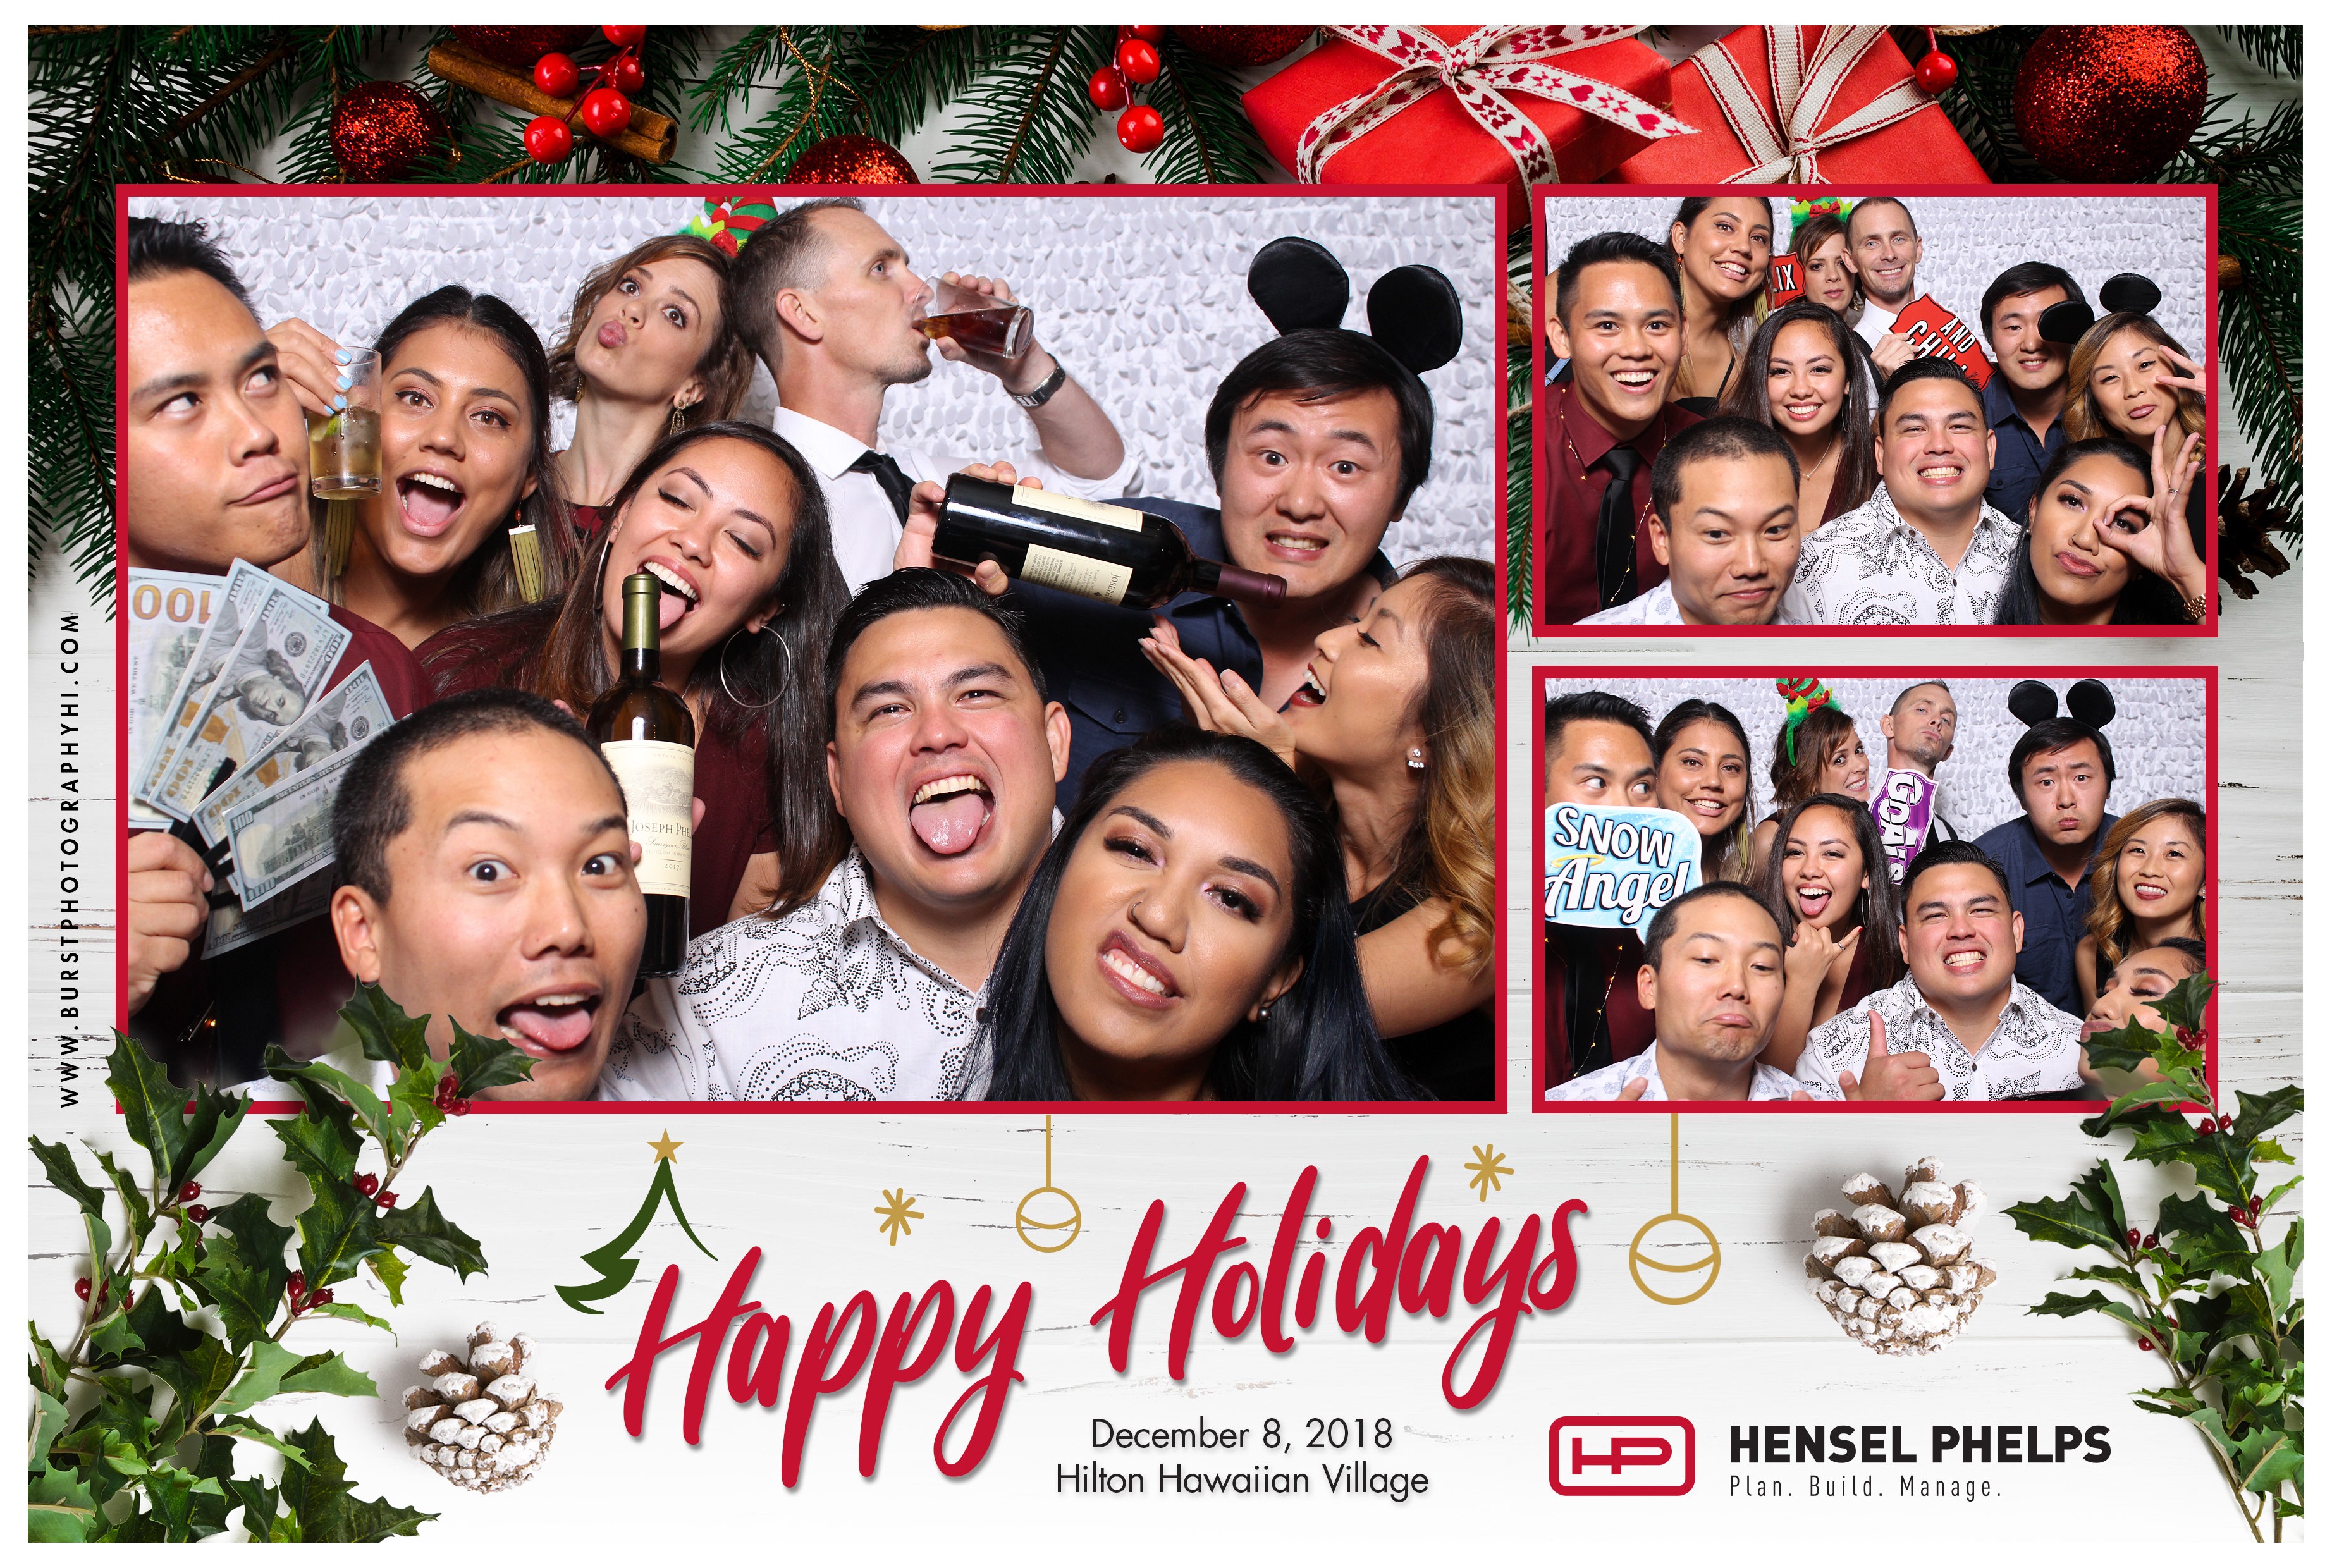 Hensel Phelps Company Holiday Party Burst Photography and Design